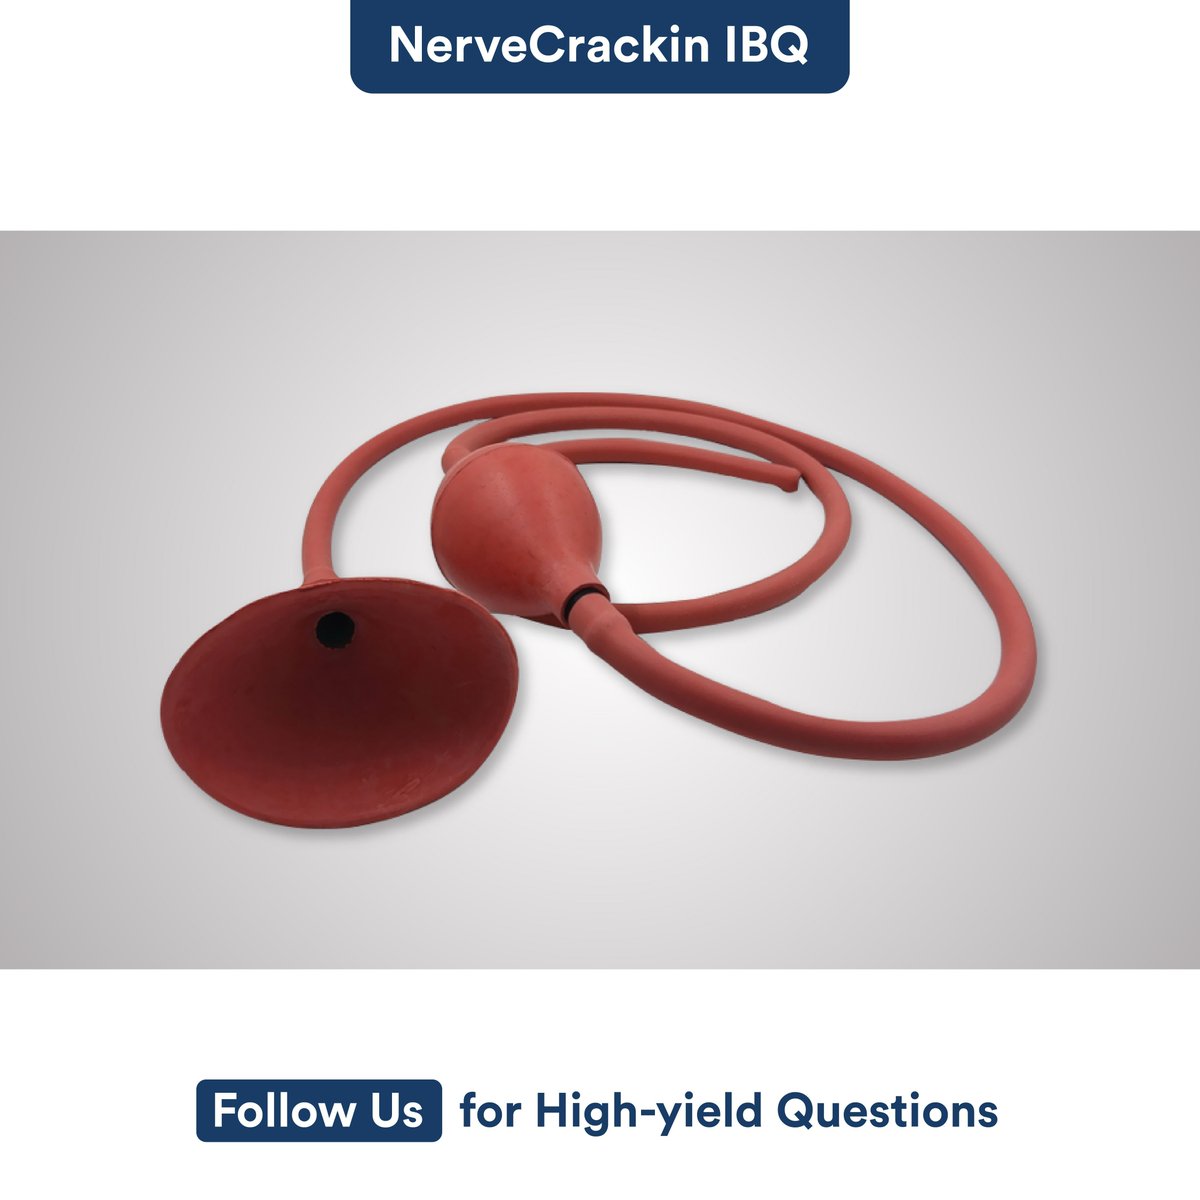 Which function corresponds to the following tube? 

A. Barium enema
B. Soap water enema
C. Nasogastric feeding
D. Gastric lavage

#DigiNerve #IBQ #NerveCrackin #QuizTime #Bariumenema #Soapwaterenema #Nasogastricfeeding #Gastriclavage #Function #Tube #MedicalImaging #PracticeMCQ